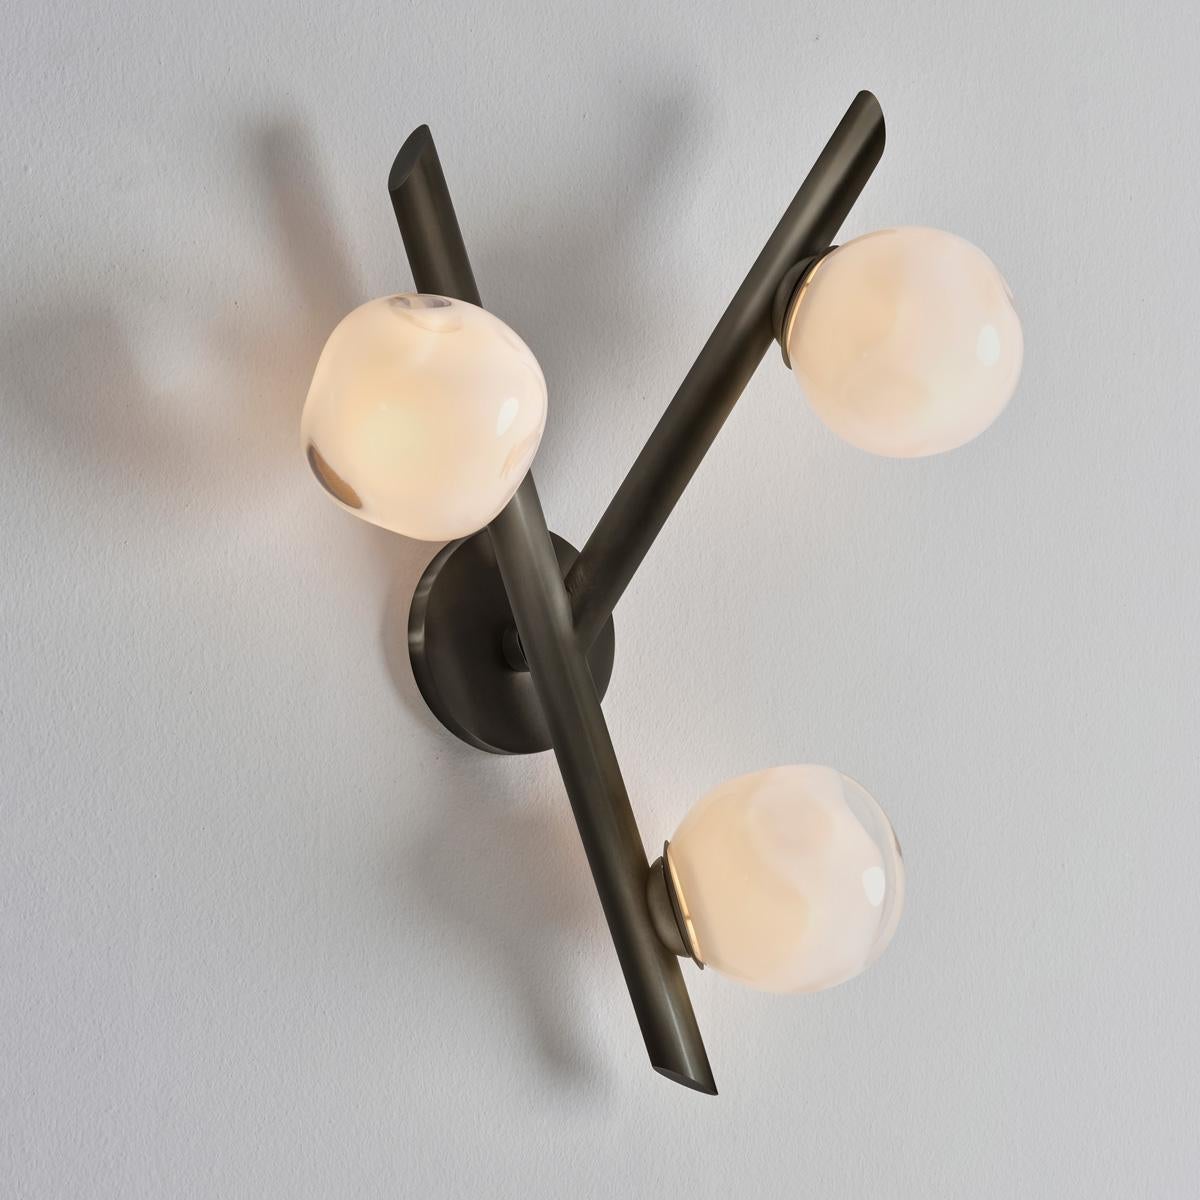 Antares Wall Light by Gaspare Asaro- Sand White Finish In New Condition For Sale In New York, NY